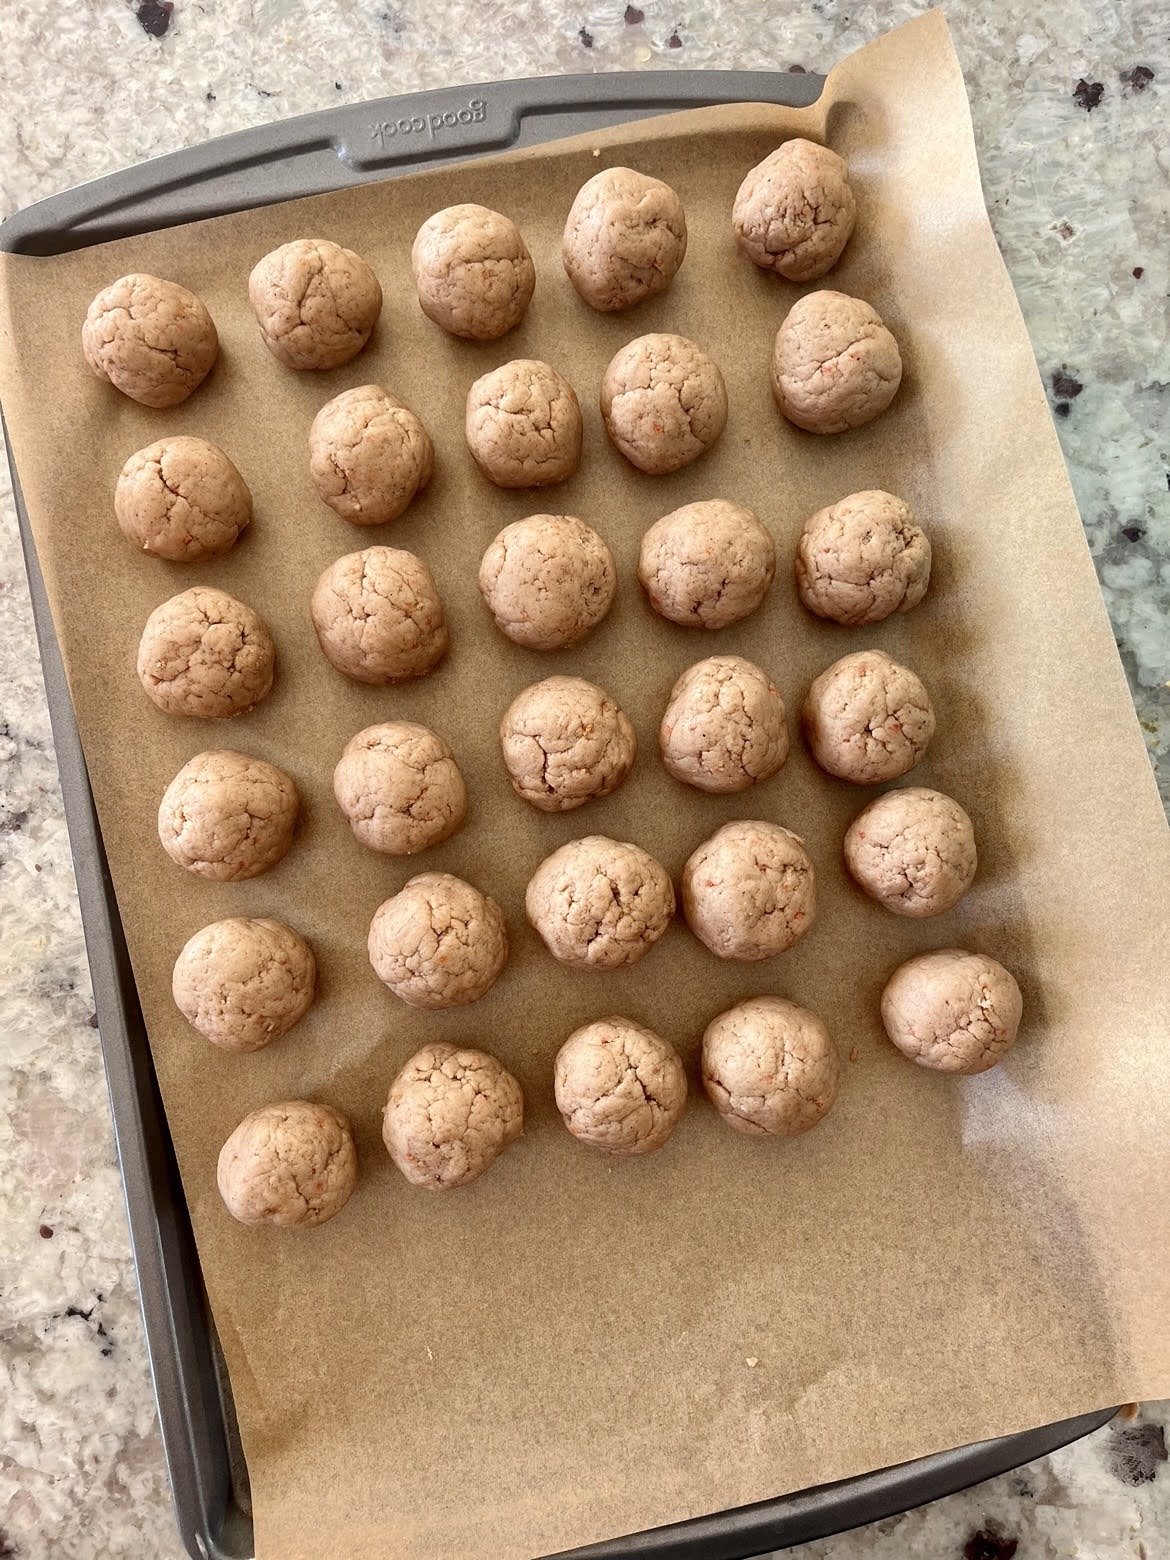 A process photo of the rolled truffles, prior to being coated with white chocolate.